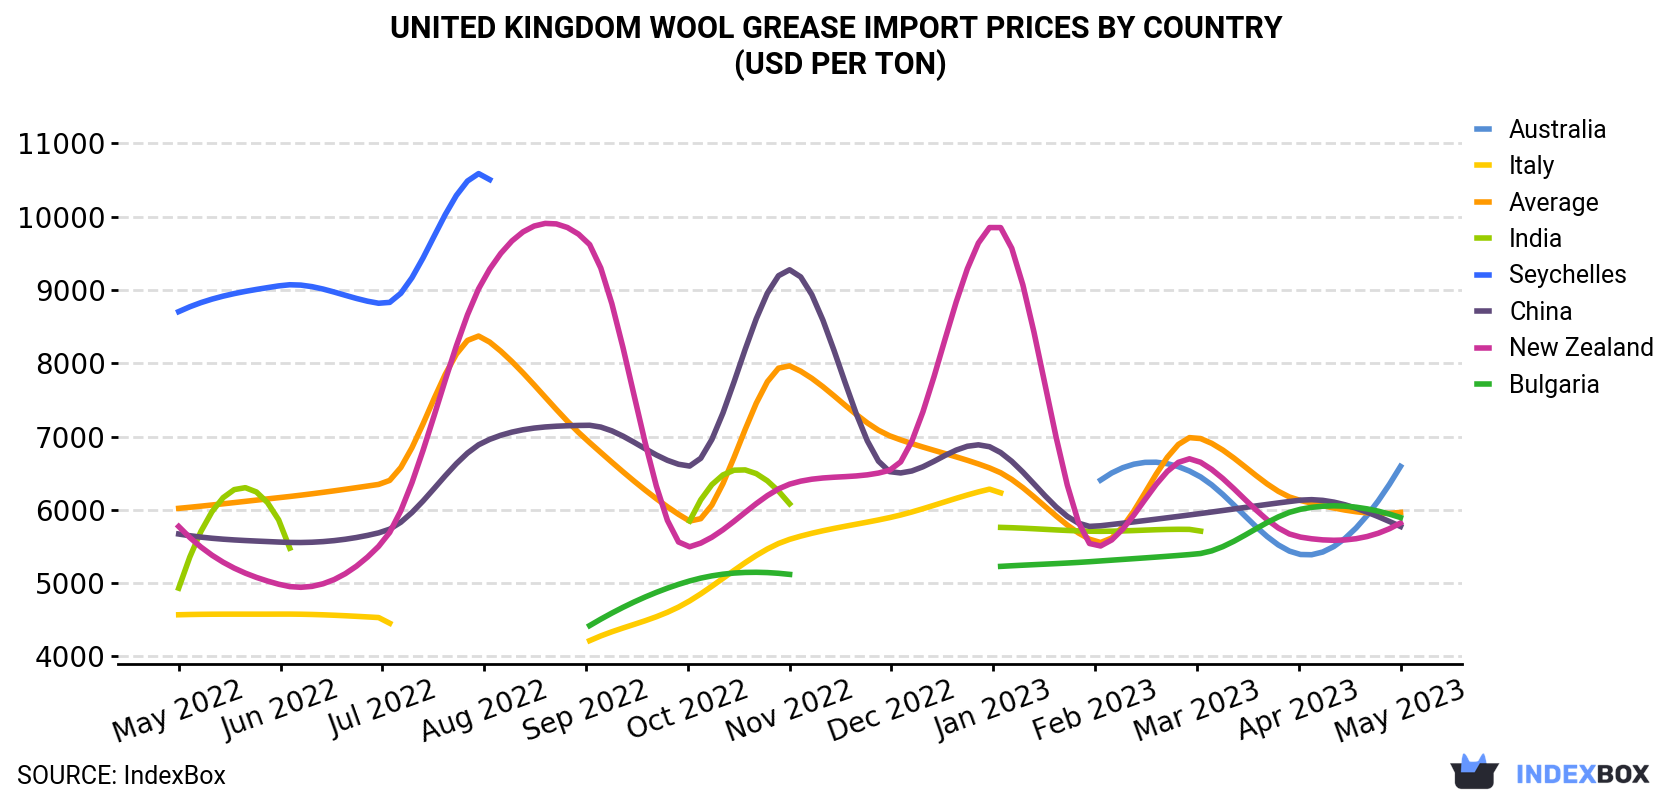 United Kingdom Wool Grease Import Prices By Country (USD Per Ton)